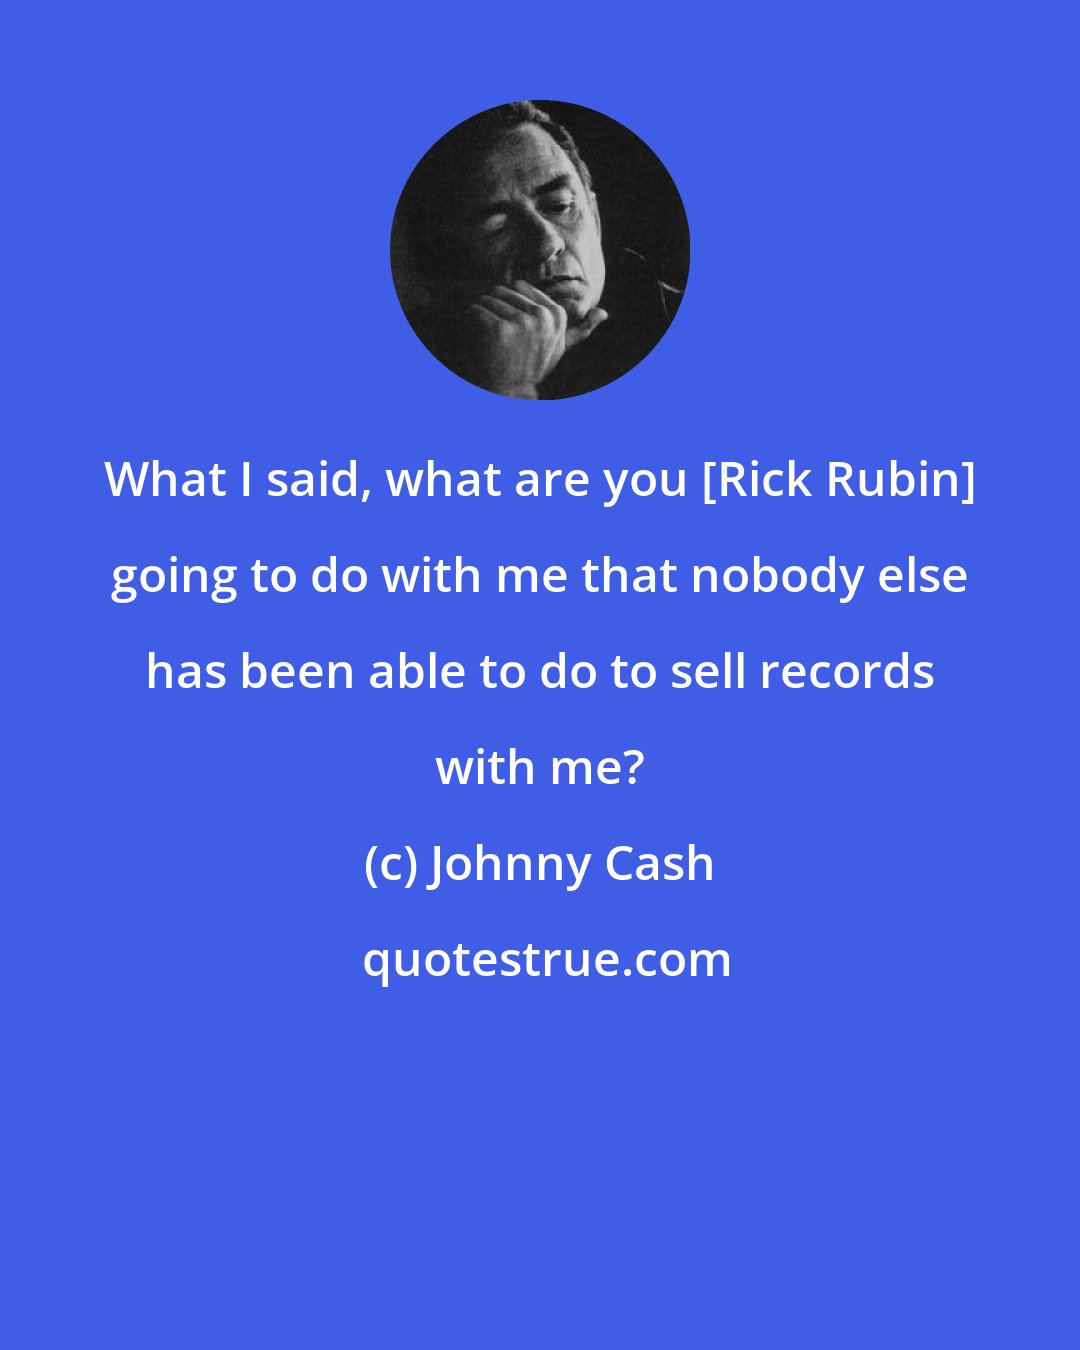 Johnny Cash: What I said, what are you [Rick Rubin] going to do with me that nobody else has been able to do to sell records with me?